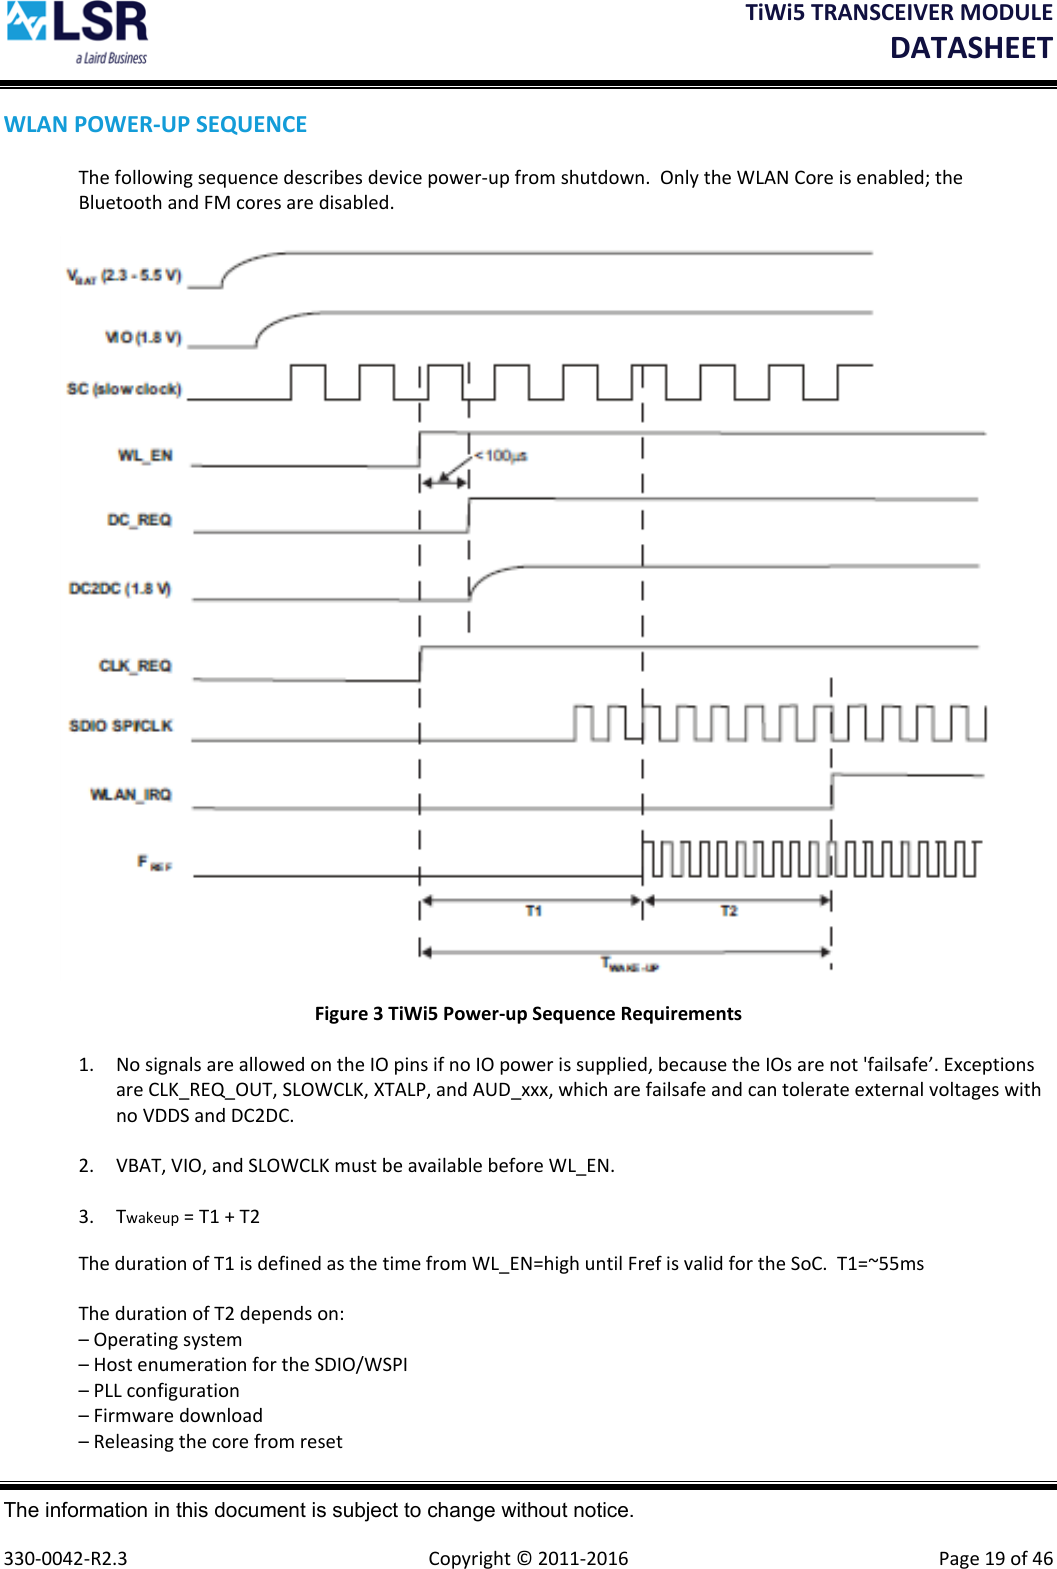 TiWi5TRANSCEIVERMODULEDATASHEET The information in this document is subject to change without notice.  330‐0042‐R2.3  Copyright©2011‐2016 Page19of46WLANPOWER‐UPSEQUENCEThefollowingsequencedescribesdevicepower‐upfromshutdown.OnlytheWLANCoreisenabled;theBluetoothandFMcoresaredisabled.Figure3TiWi5Power‐upSequenceRequirements1. NosignalsareallowedontheIOpinsifnoIOpowerissupplied,becausetheIOsarenot&apos;failsafe’.ExceptionsareCLK_REQ_OUT,SLOWCLK,XTALP,andAUD_xxx,whicharefailsafeandcantolerateexternalvoltageswithnoVDDSandDC2DC.2. VBAT,VIO,andSLOWCLKmustbeavailablebeforeWL_EN.3. Twakeup=T1+T2ThedurationofT1isdefinedasthetimefromWL_EN=highuntilFrefisvalidfortheSoC.T1=~55msThedurationofT2dependson:–Operatingsystem–HostenumerationfortheSDIO/WSPI–PLLconfiguration–Firmwaredownload–Releasingthecorefromreset